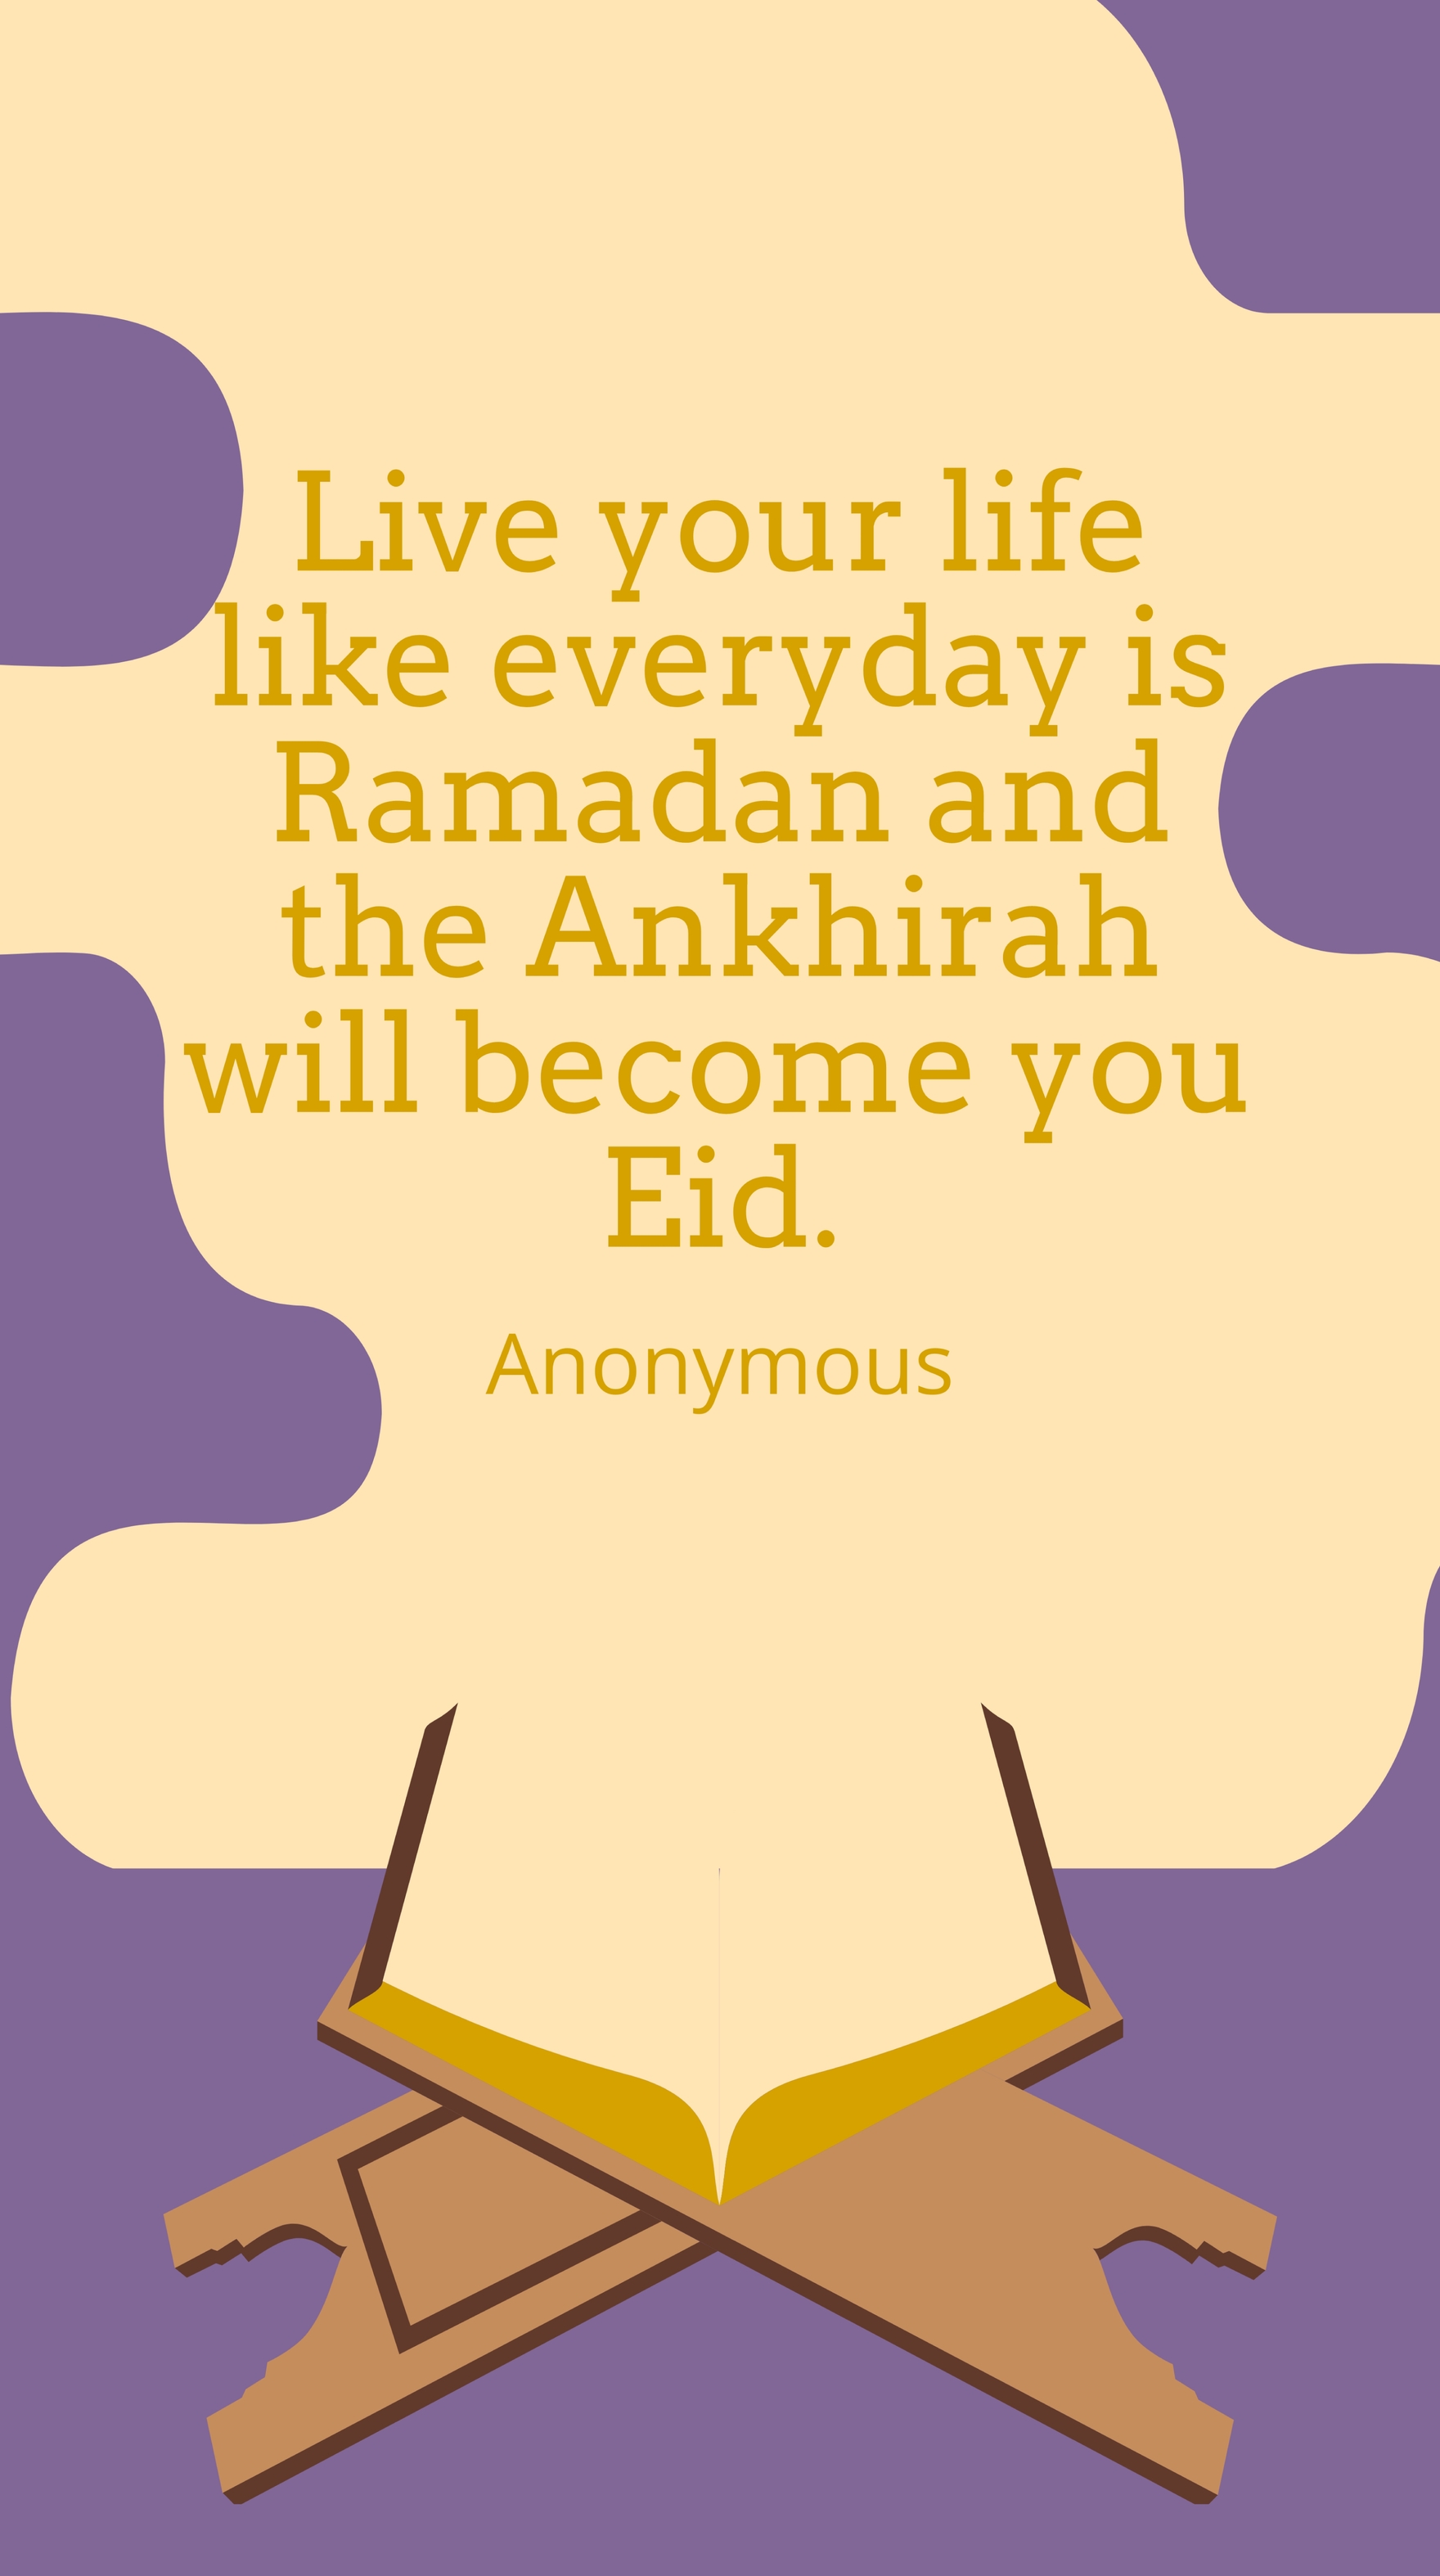 Anonymous - Live your life like everyday is Ramadan and the Ankhirah will become you Eid.